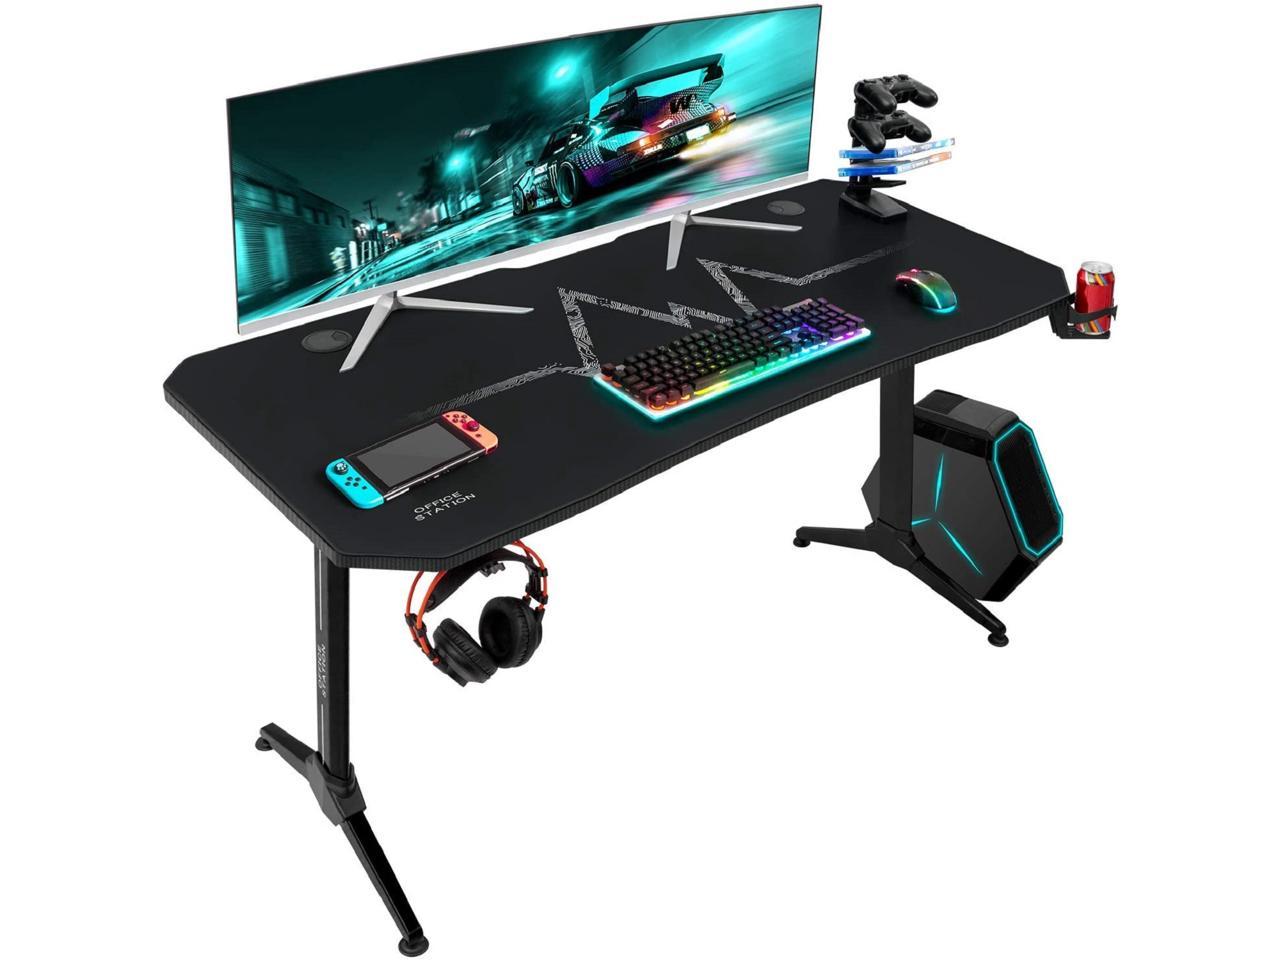 43" Gaming Computer Desk Laptop PC Writing Table W/ Cup Holder Headset Hook US 